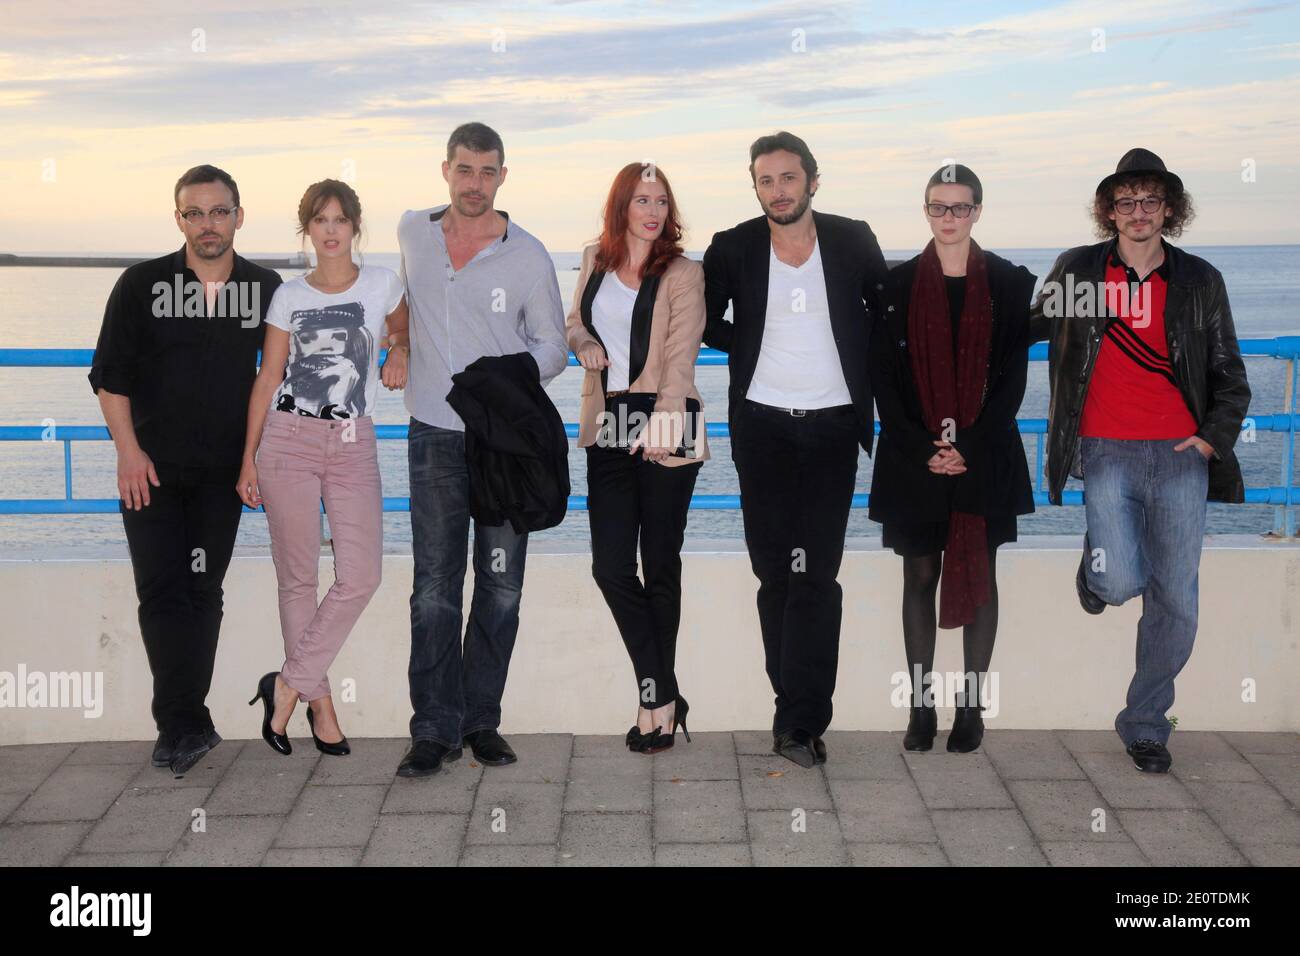 Jury's members (L to R) Cyril Mennegun, Elodie Navarre, Thierry Neuvic, Audrey Fleurot, Michael Cohen, Pauline Etienne and Julien Courbey pose for photographers during the opening of the 17th Young Directors International Film Festival in Saint-Jean-de-Luz, France on October 09, 2012. Photo by Jerome Domine/ABACAPRESS.COM Stock Photo